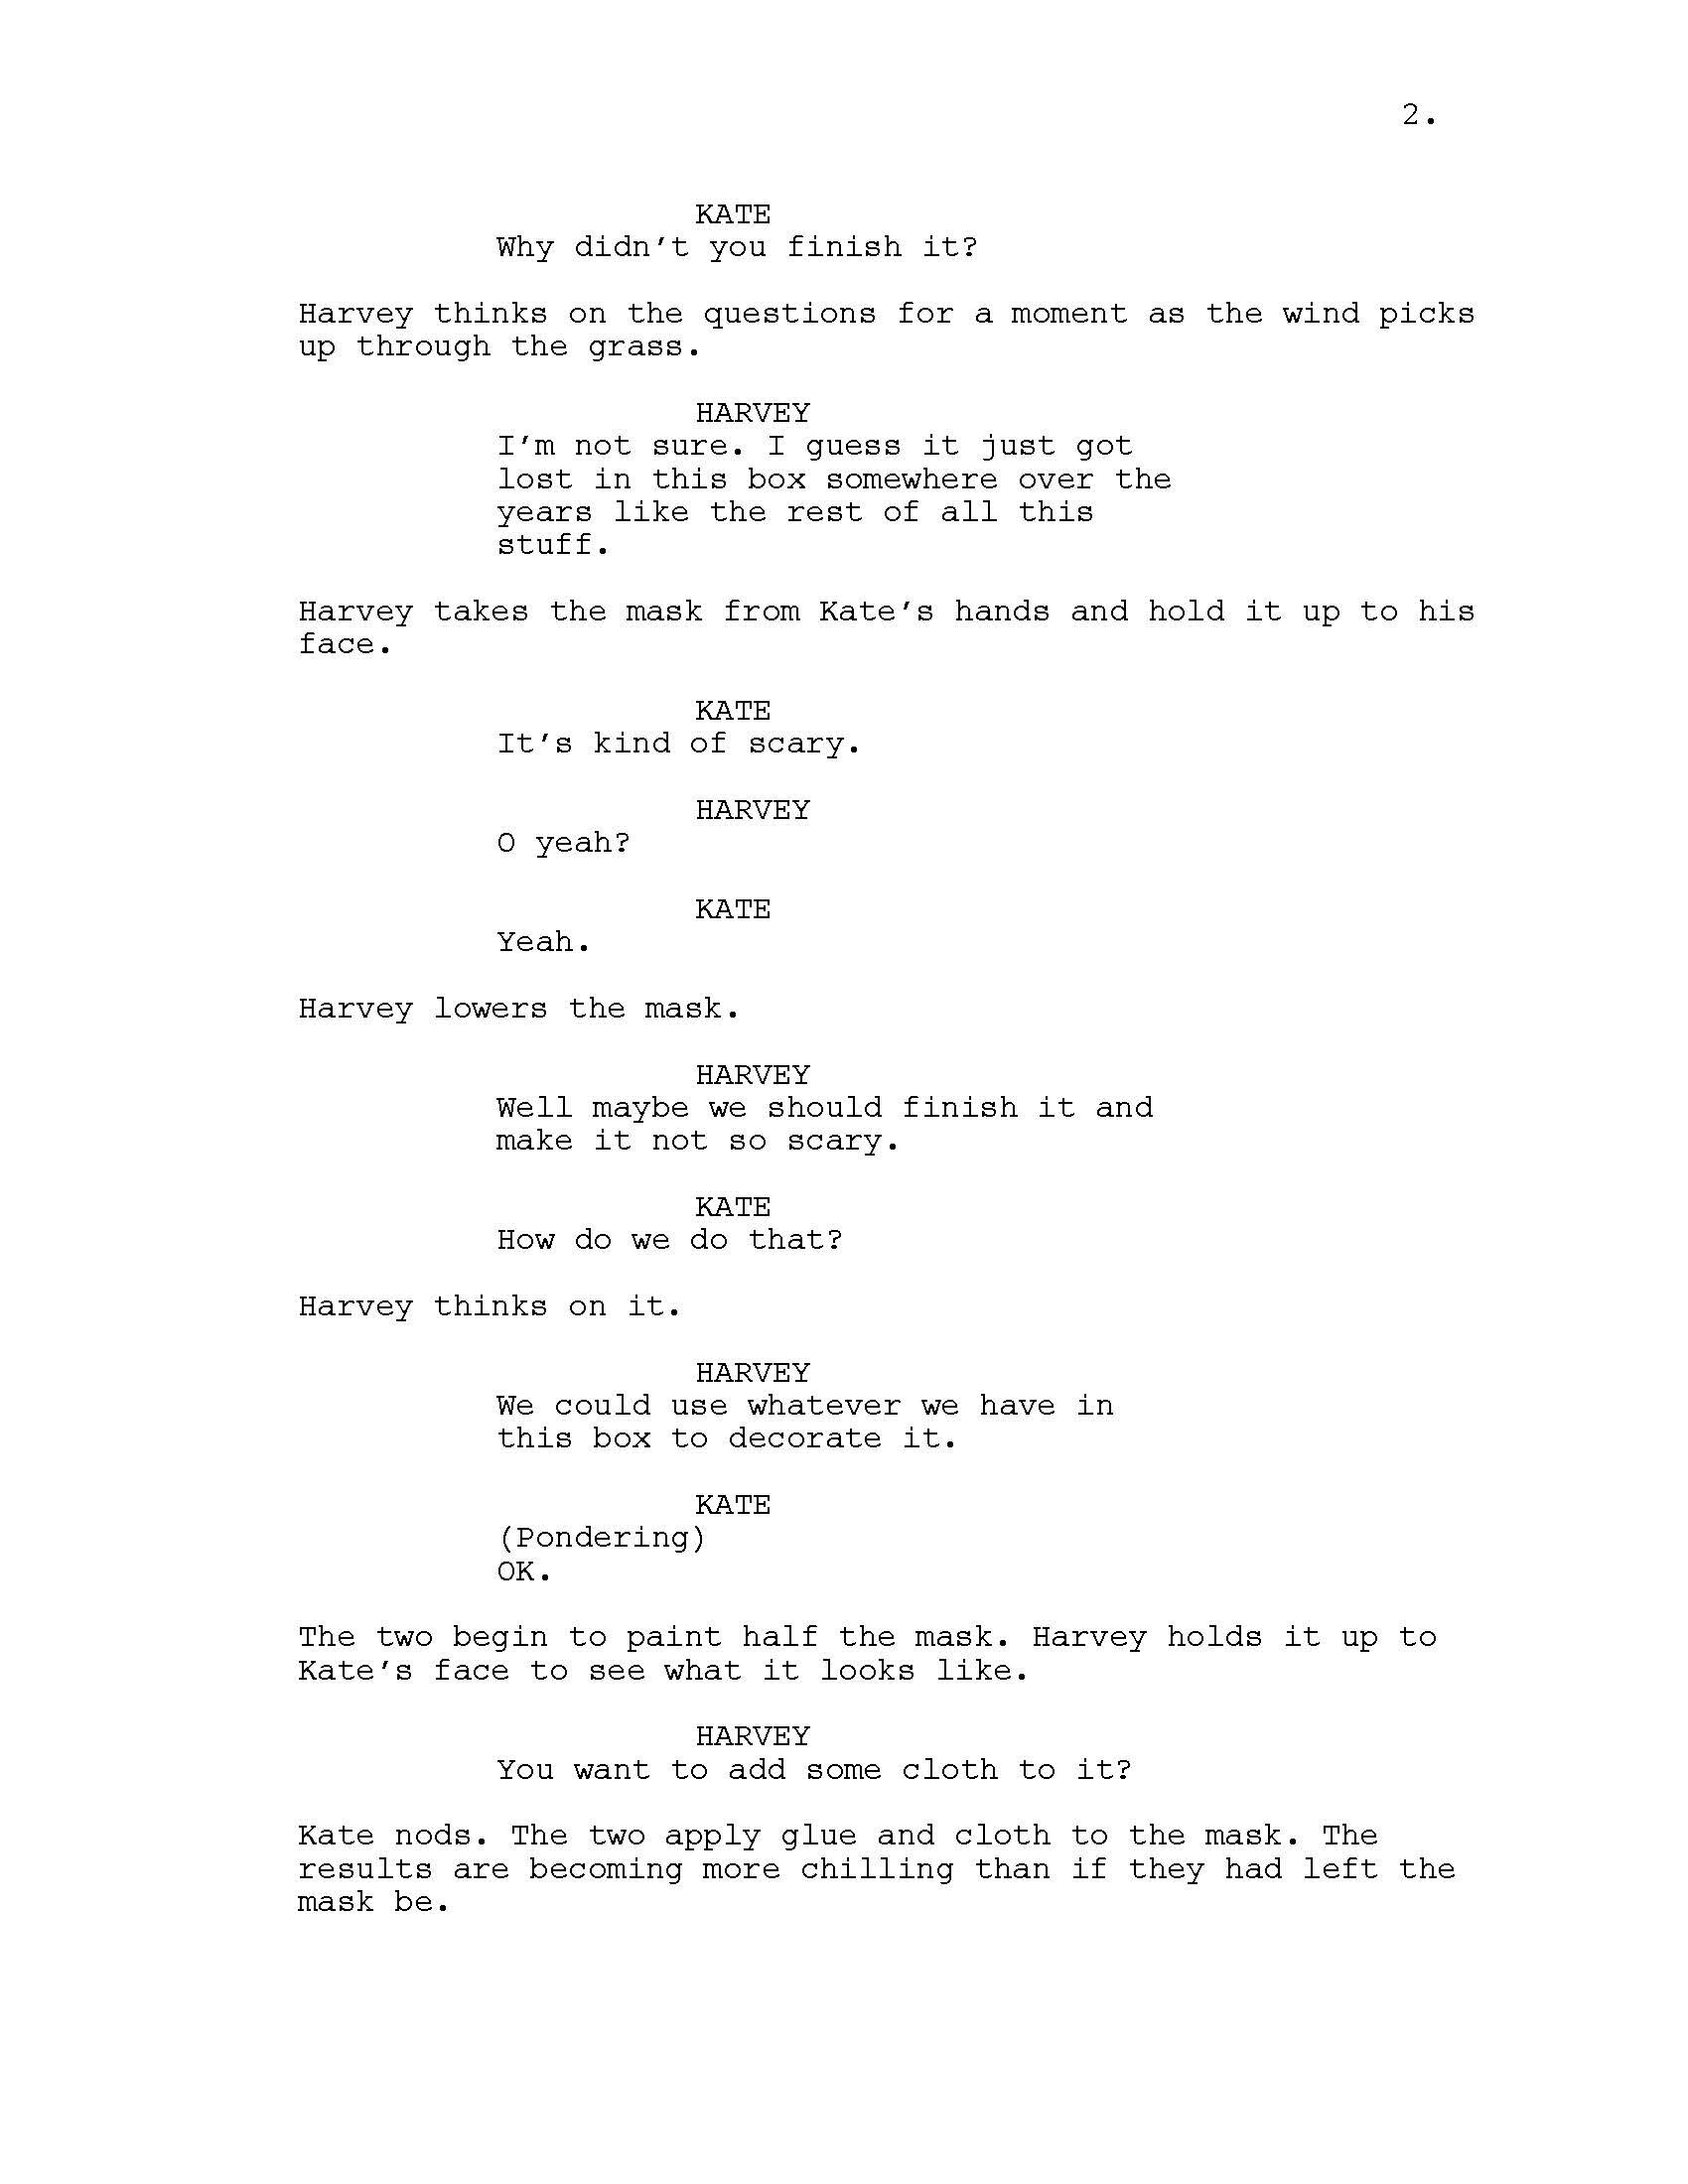 Uncommitted Script v5 (1)_Page_003.jpg